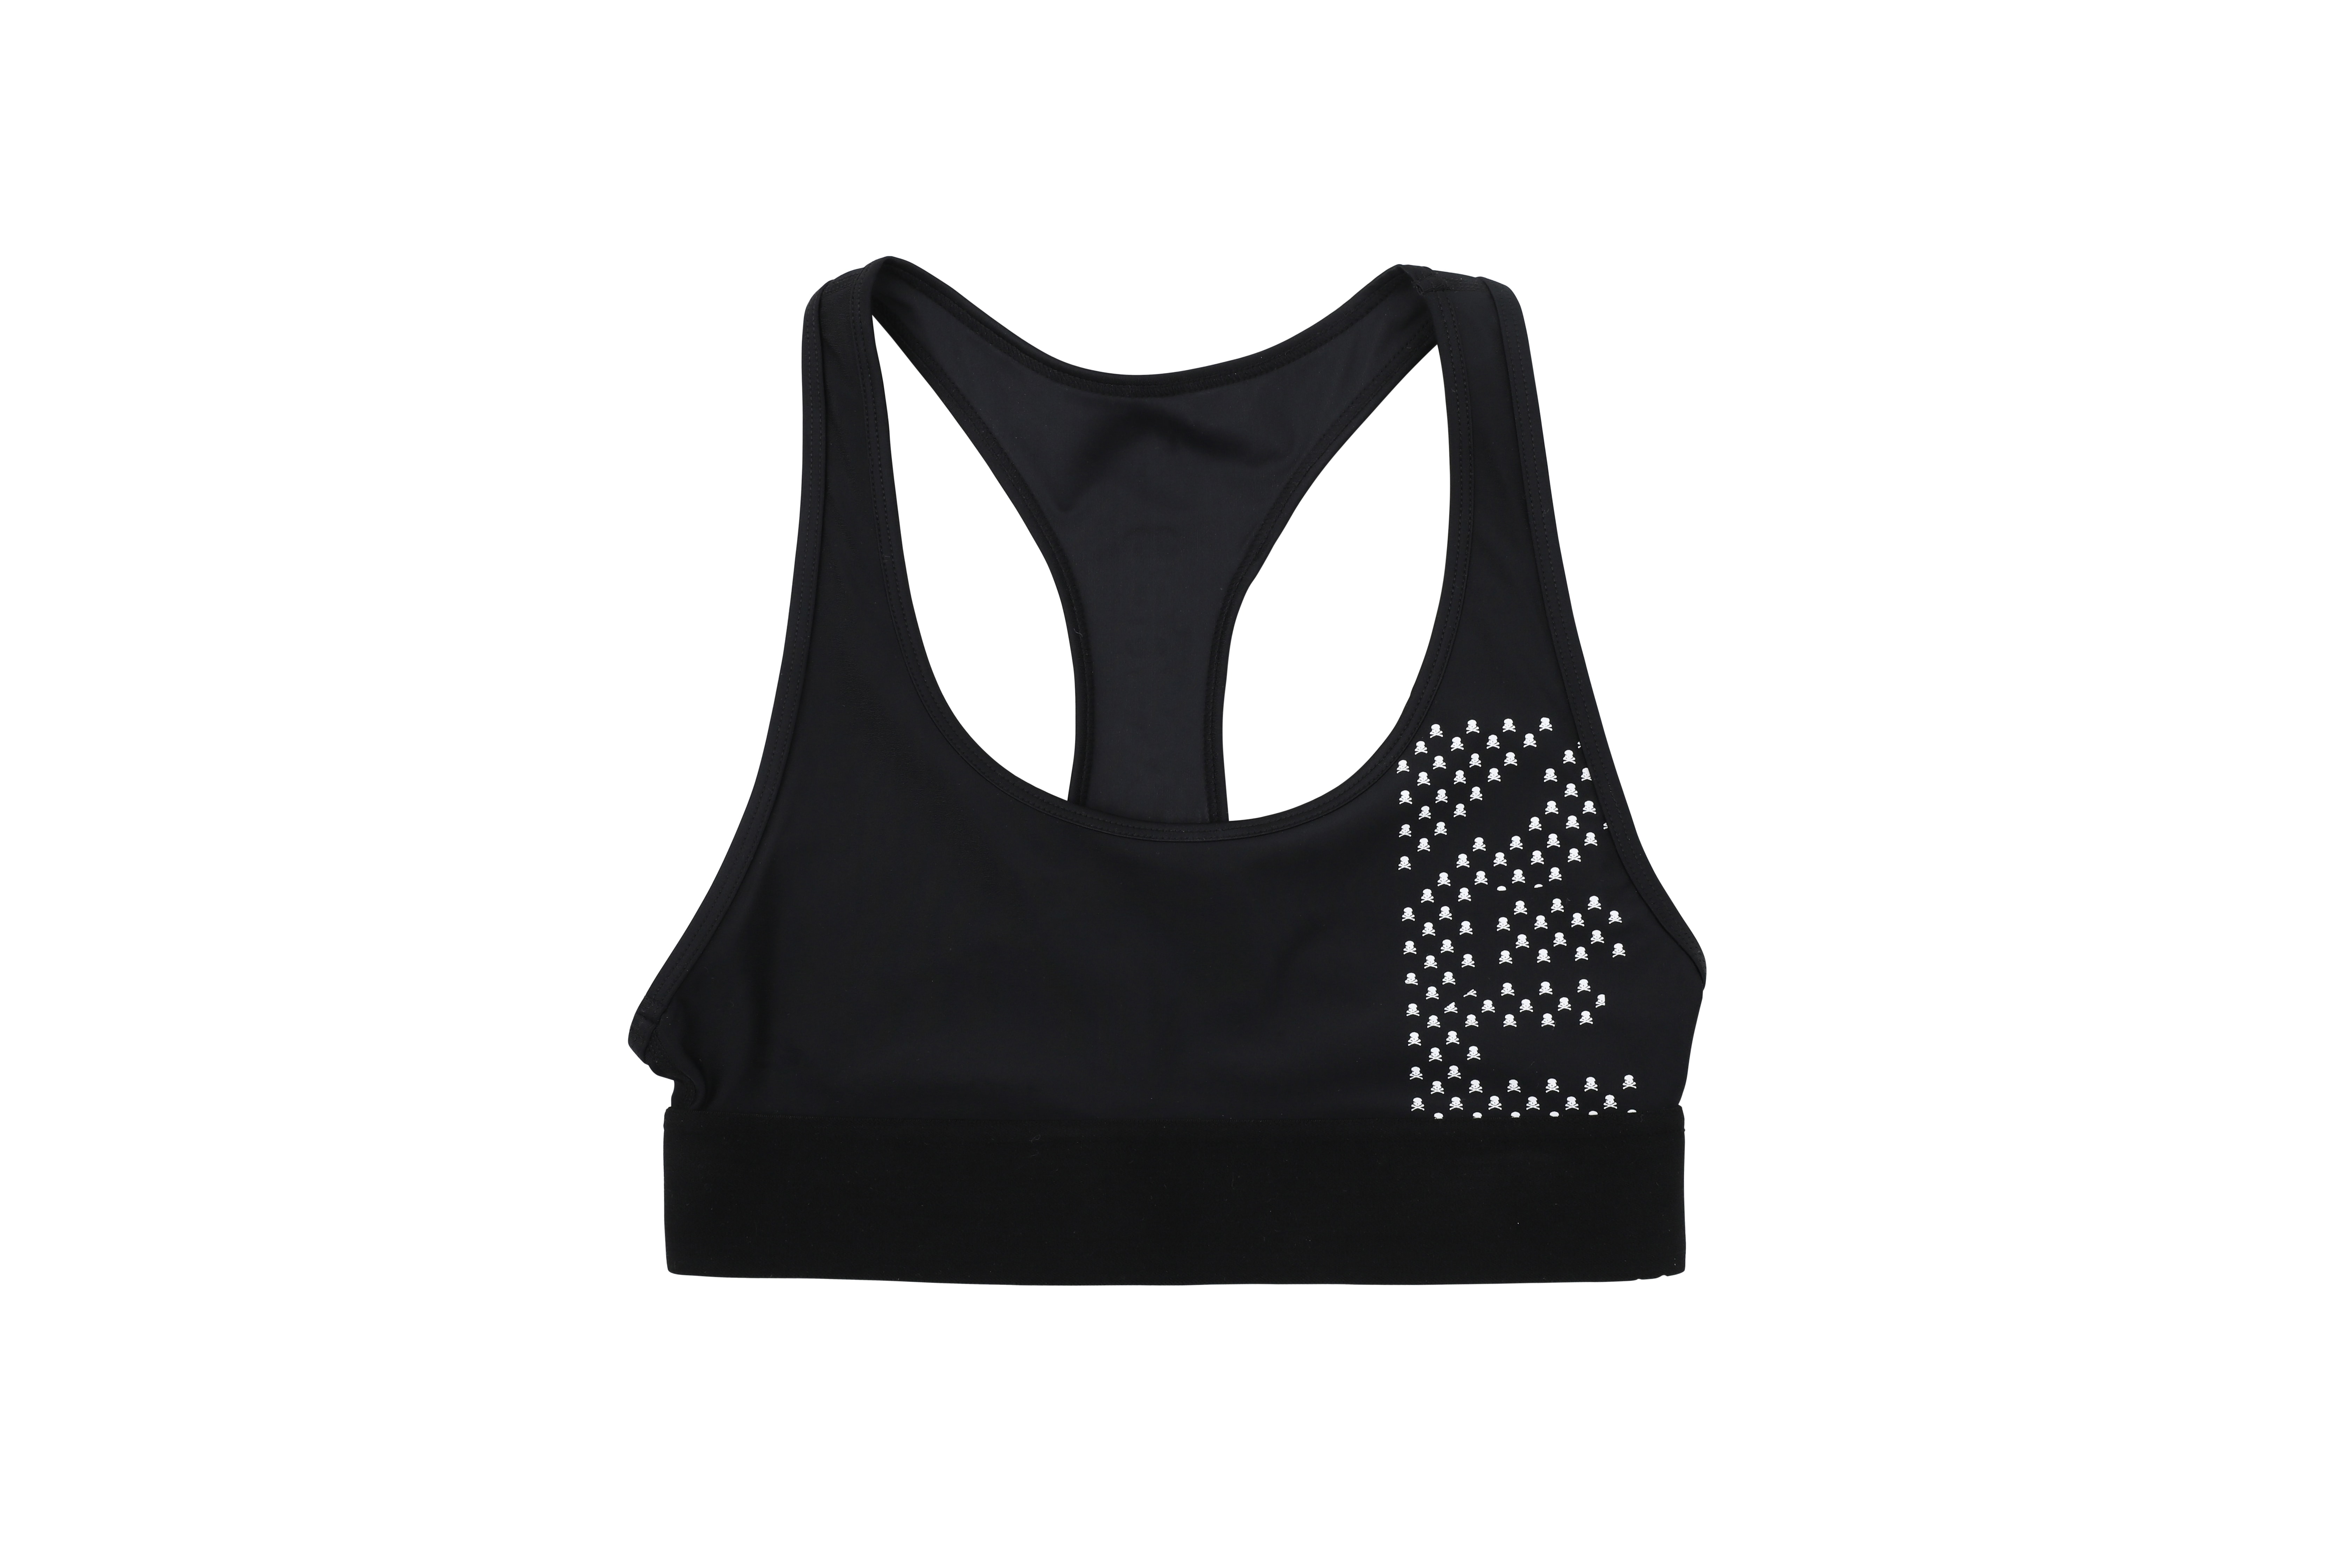 PE Nation P.E Nation SoulCycle Spinning Studio Workout Gear New Year's Resolution Capsule Collection Active Wear Leggings Sportswear Sports Bra Athleisure